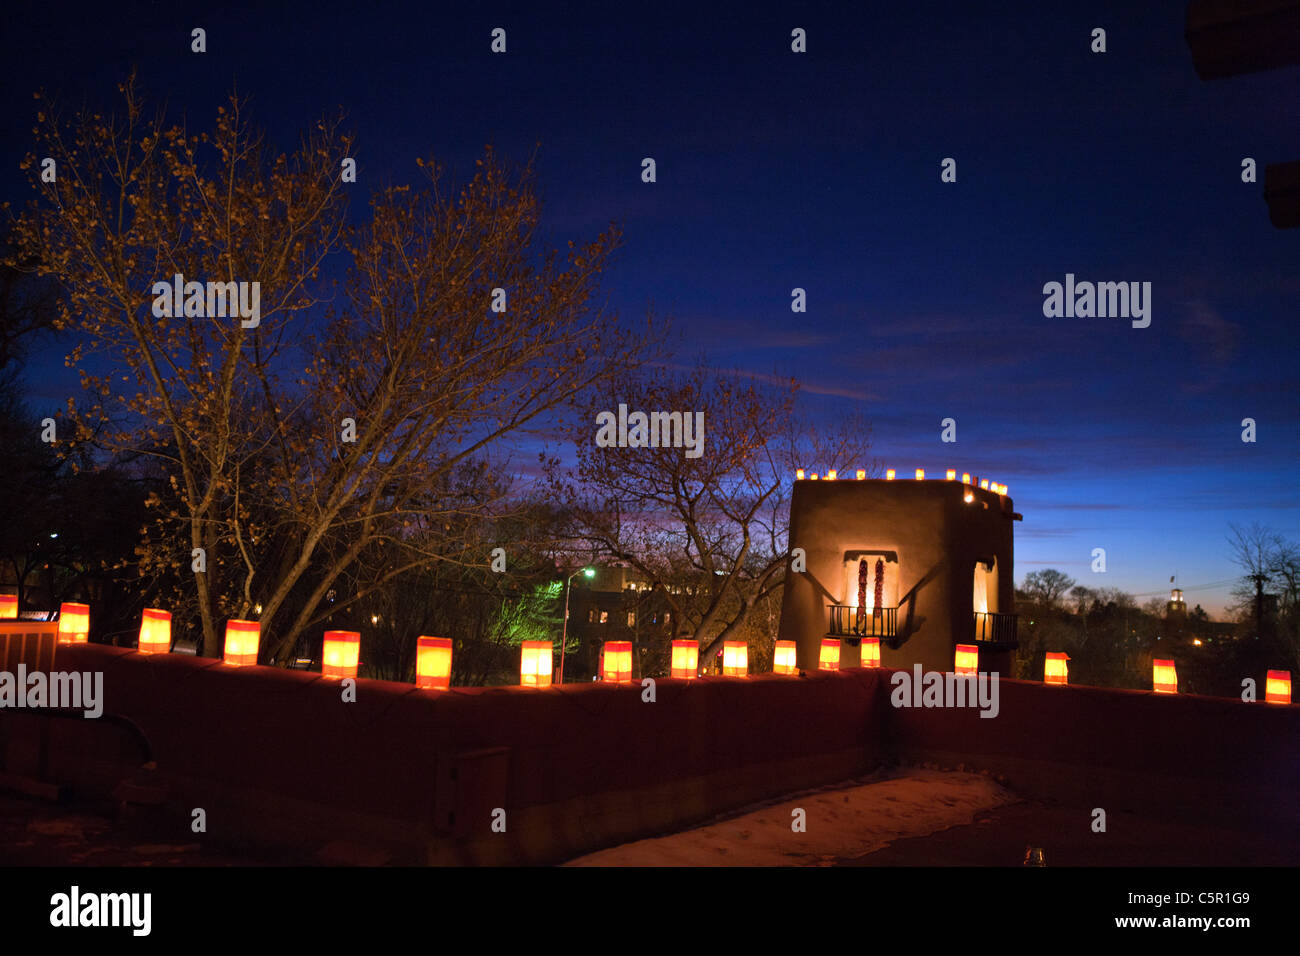 Farolitas line the roof top of the Inn on the Alameda at sunset, Santa Fe, New Mexico, United States of America Stock Photo